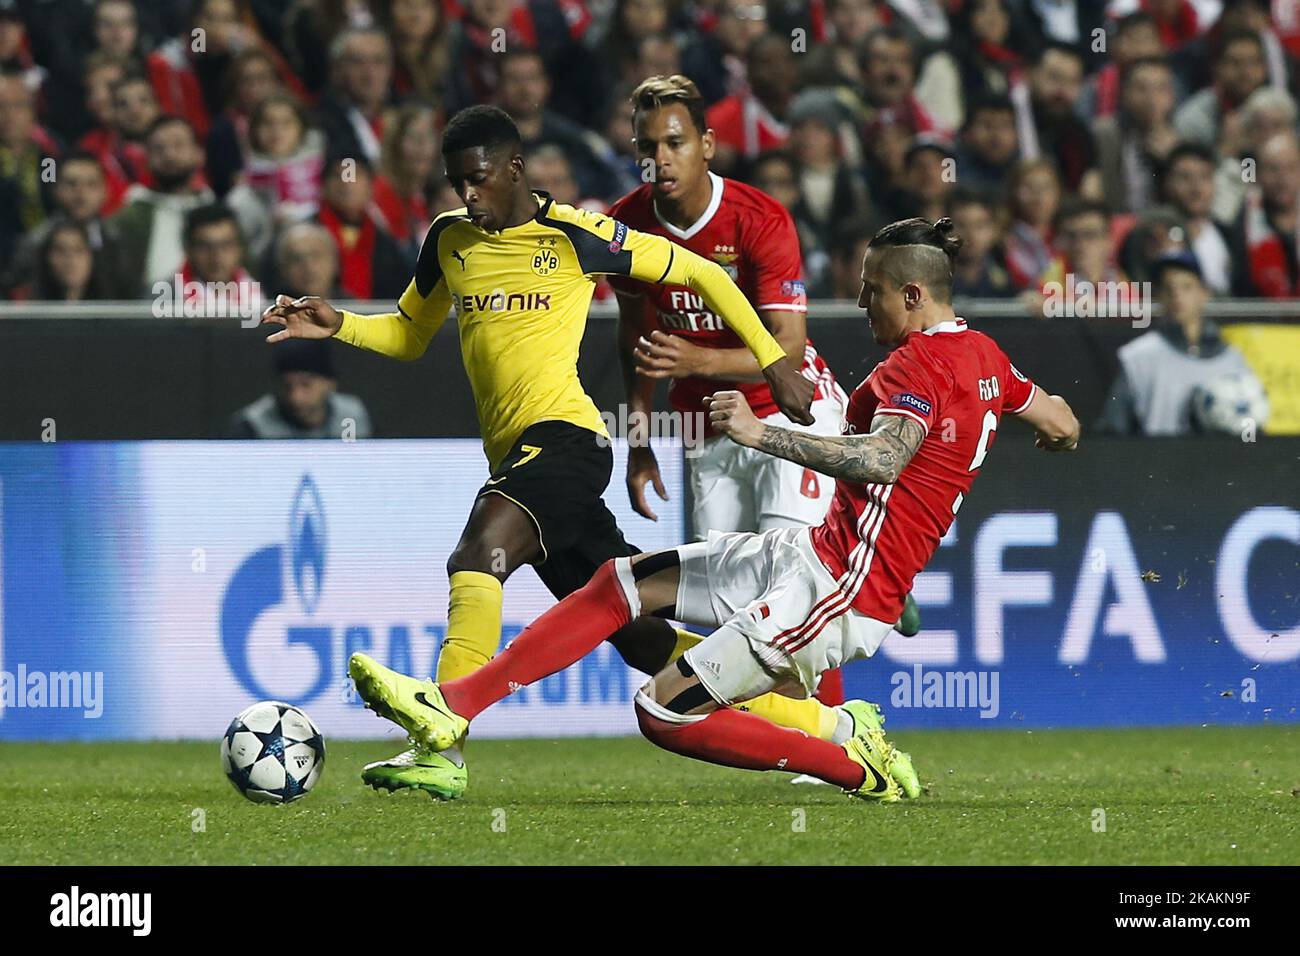 Dortmund's forward Ousmane Dembele (L) vies for the ball with Benfica's midfielder Ljubomir Fejsa (R) and Benfica's midfielder Filipe Augusto (C) during Champions League 2016/17 match between SL Benfica vs BVB Borussia Dortmund, in Lisbon, on February 14, 2017. (Photo by Carlos Palma/NurPhoto) *** Please Use Credit from Credit Field *** Stock Photo